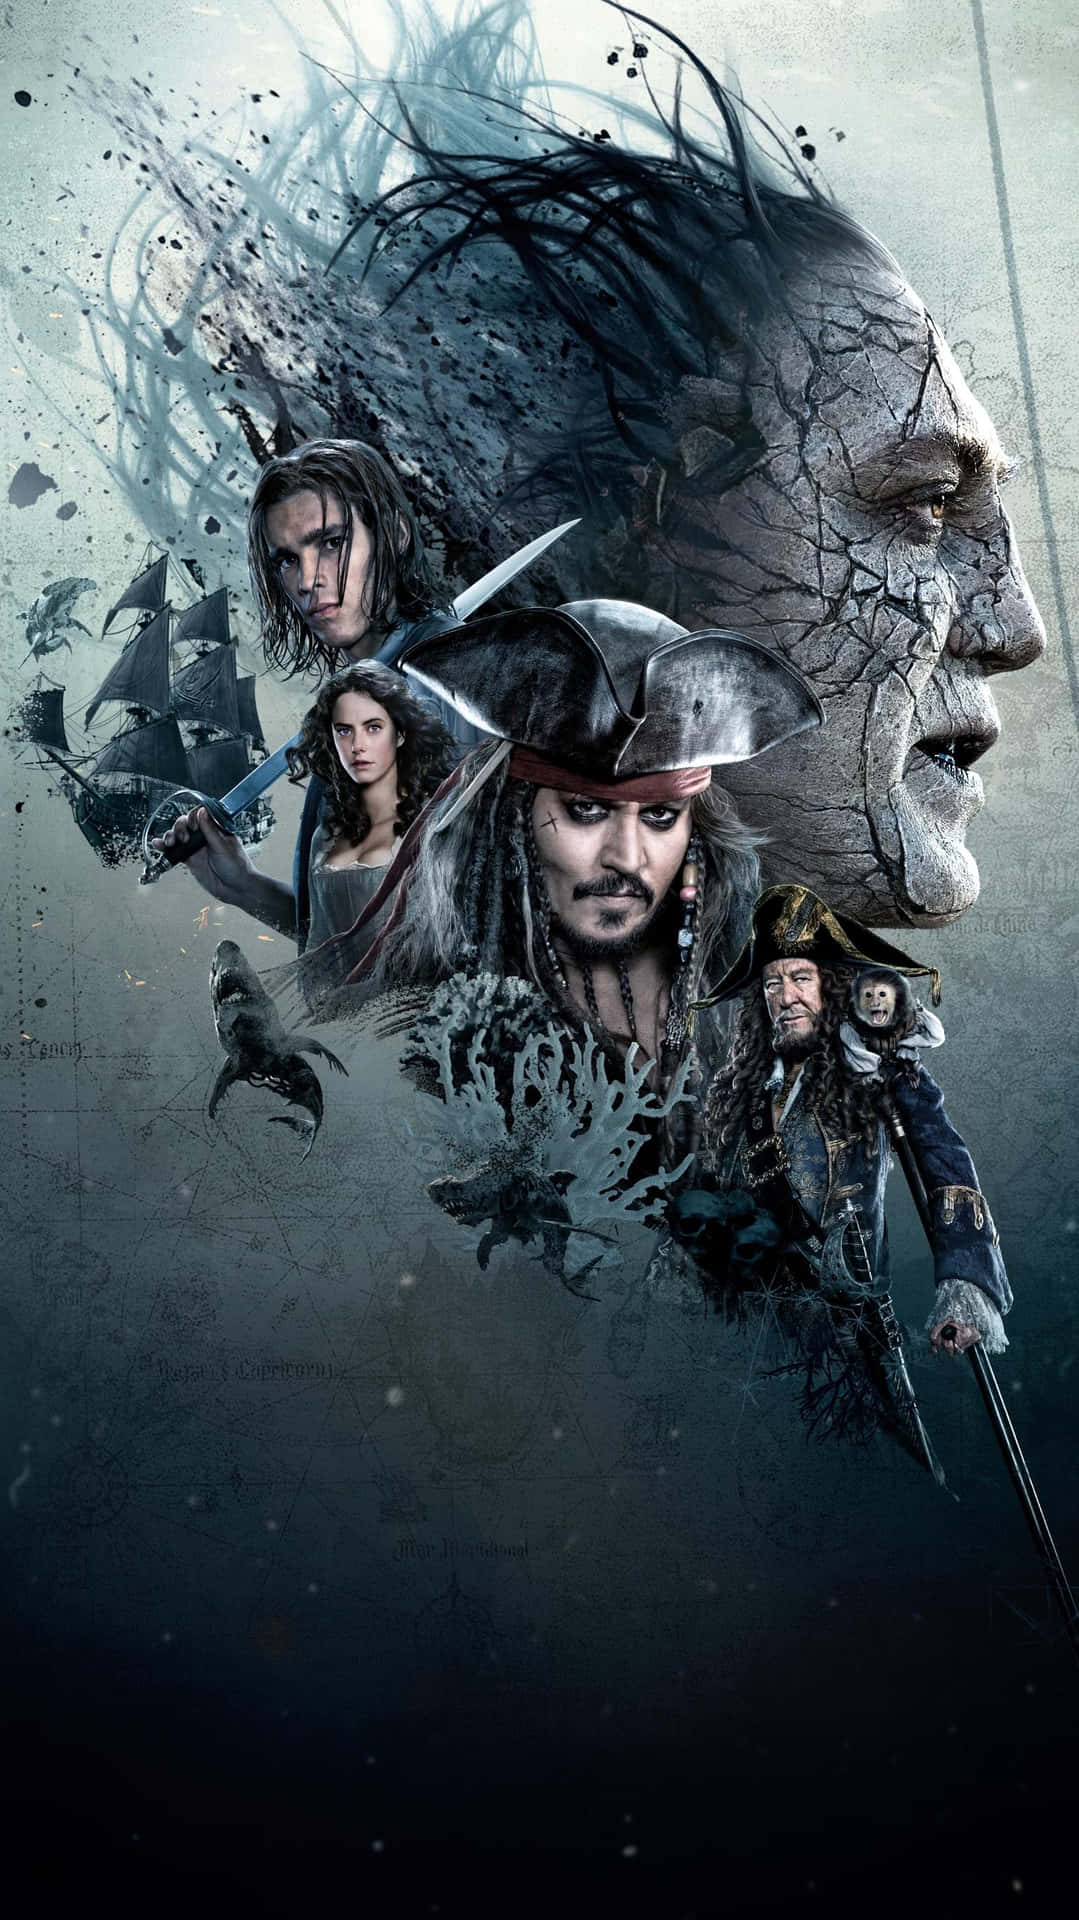 Jack Sparrow leads his crew on an adventurous quest in Pirates Of The Caribbean.